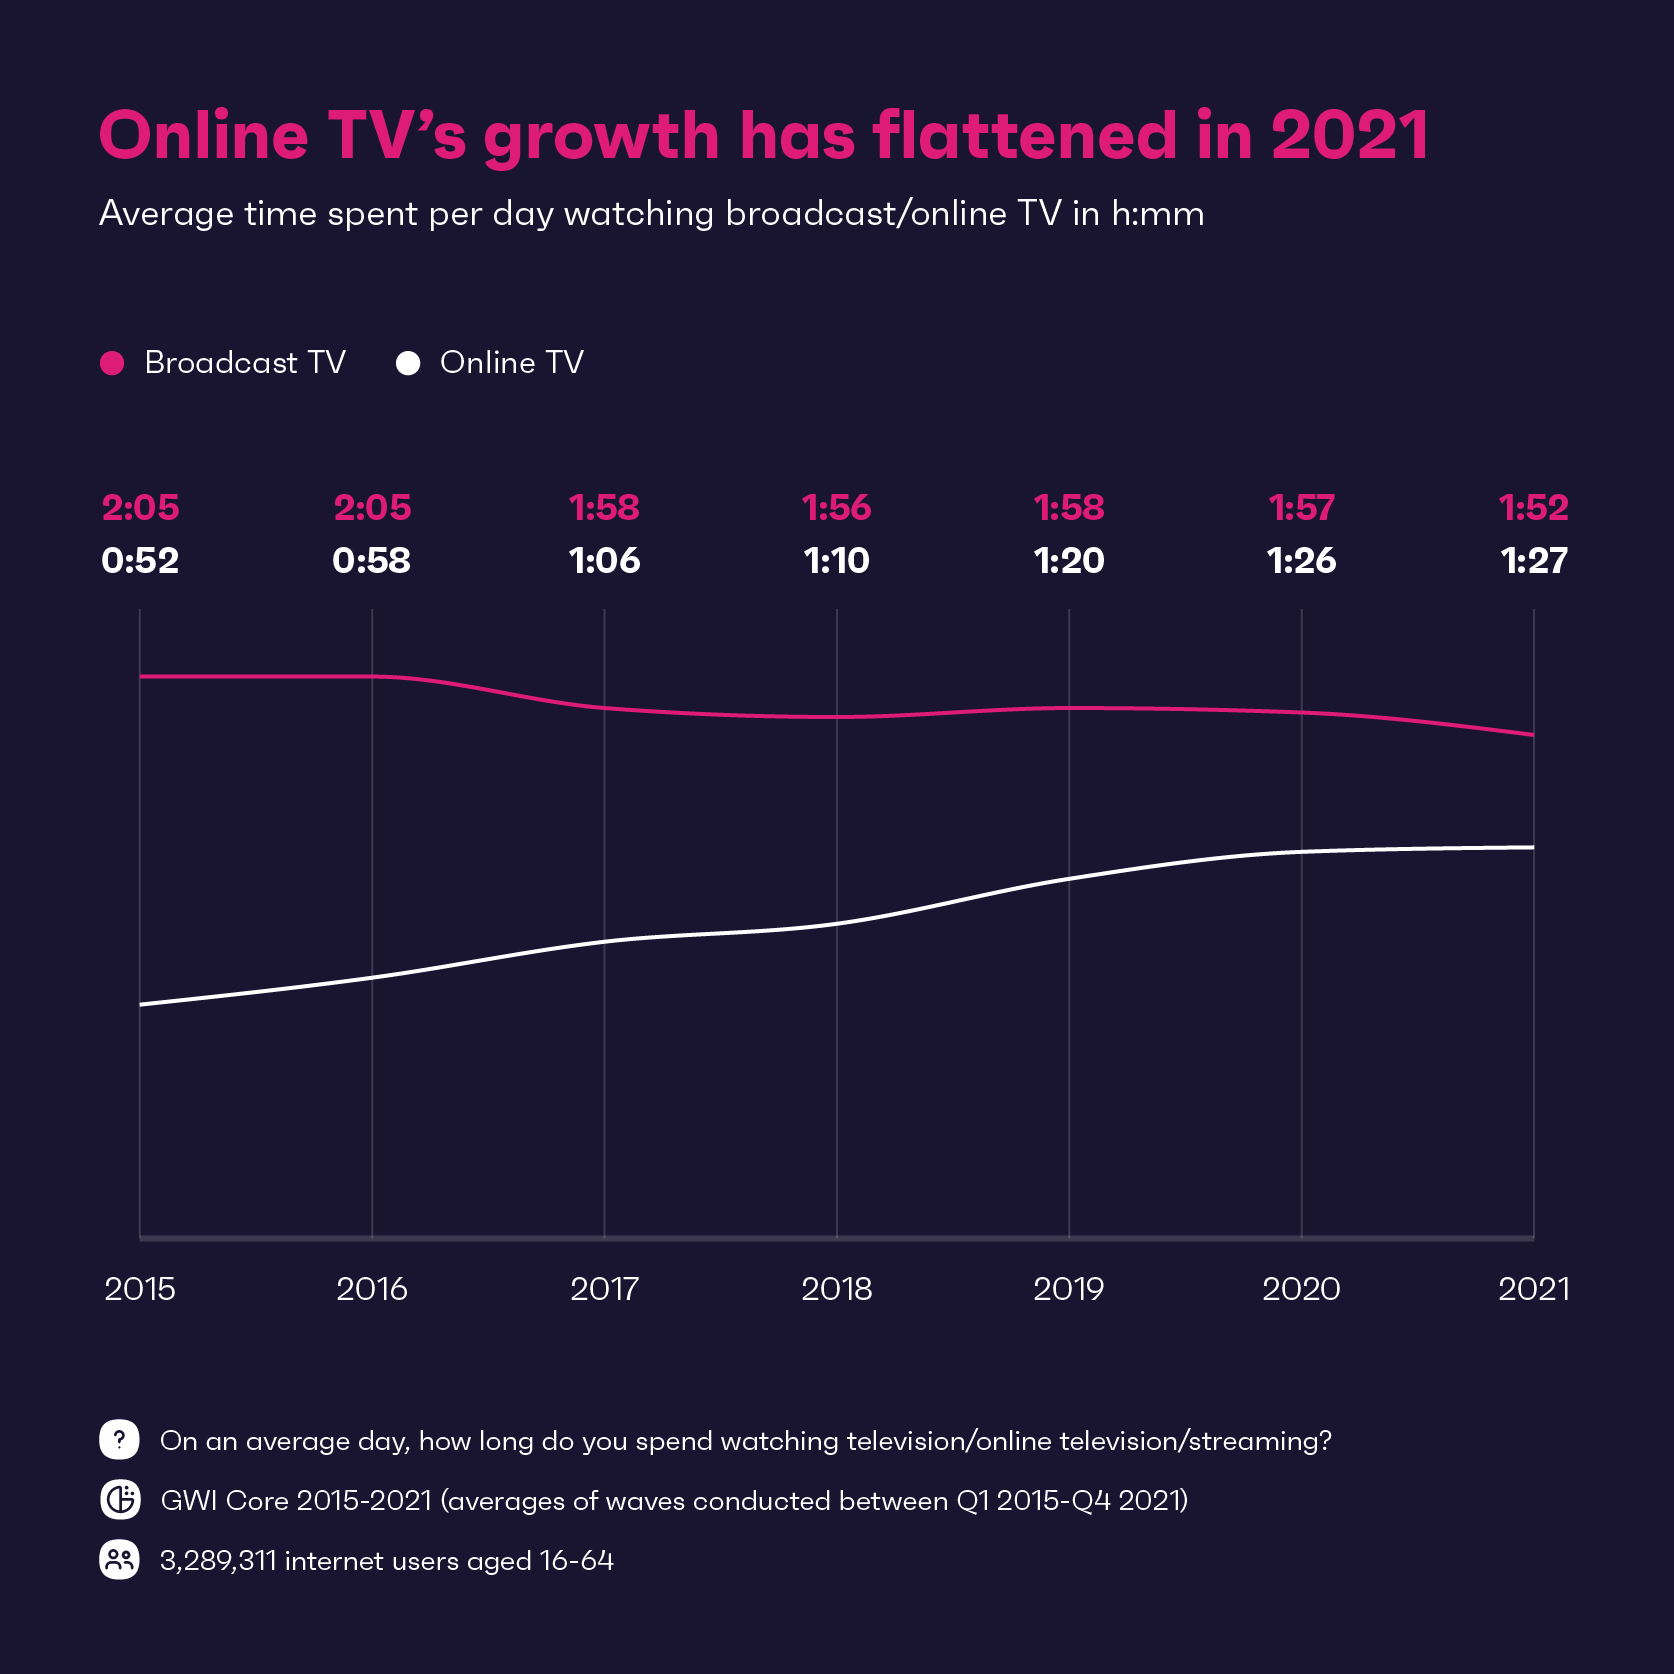 Online TV's growth has flattened in 2021